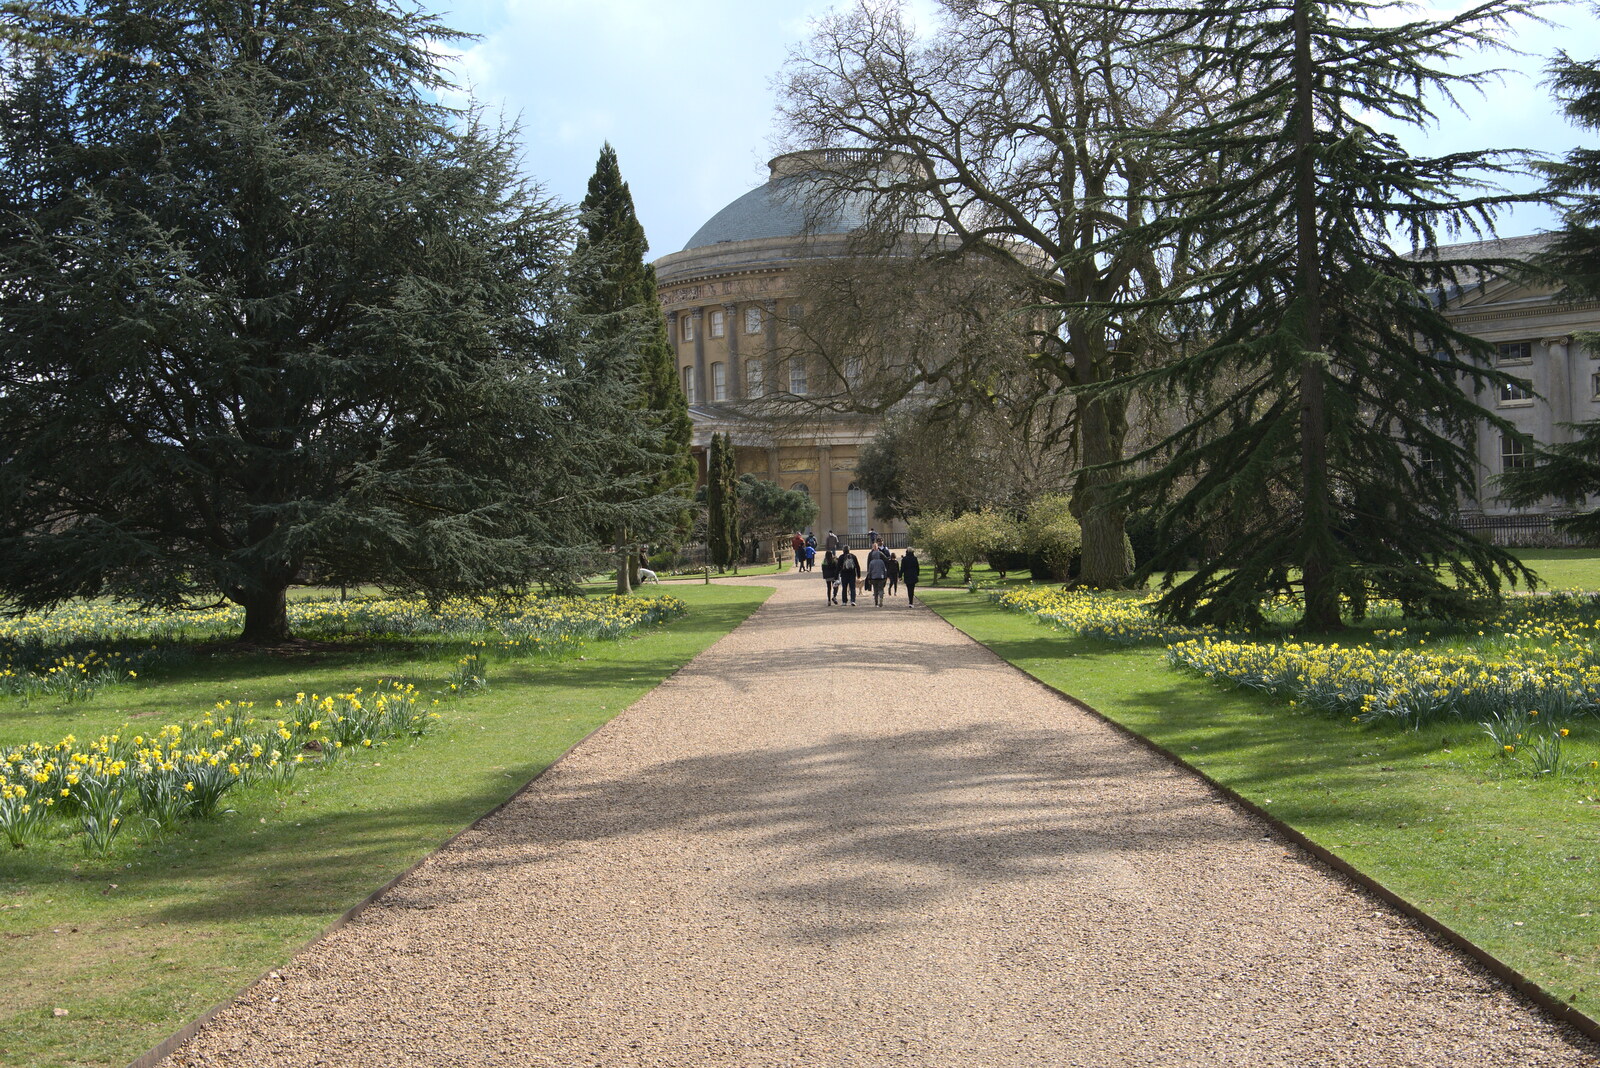 The gravel drive up to the rotunda from A Return to Ickworth House, Horringer, Suffolk - 11th April 2021